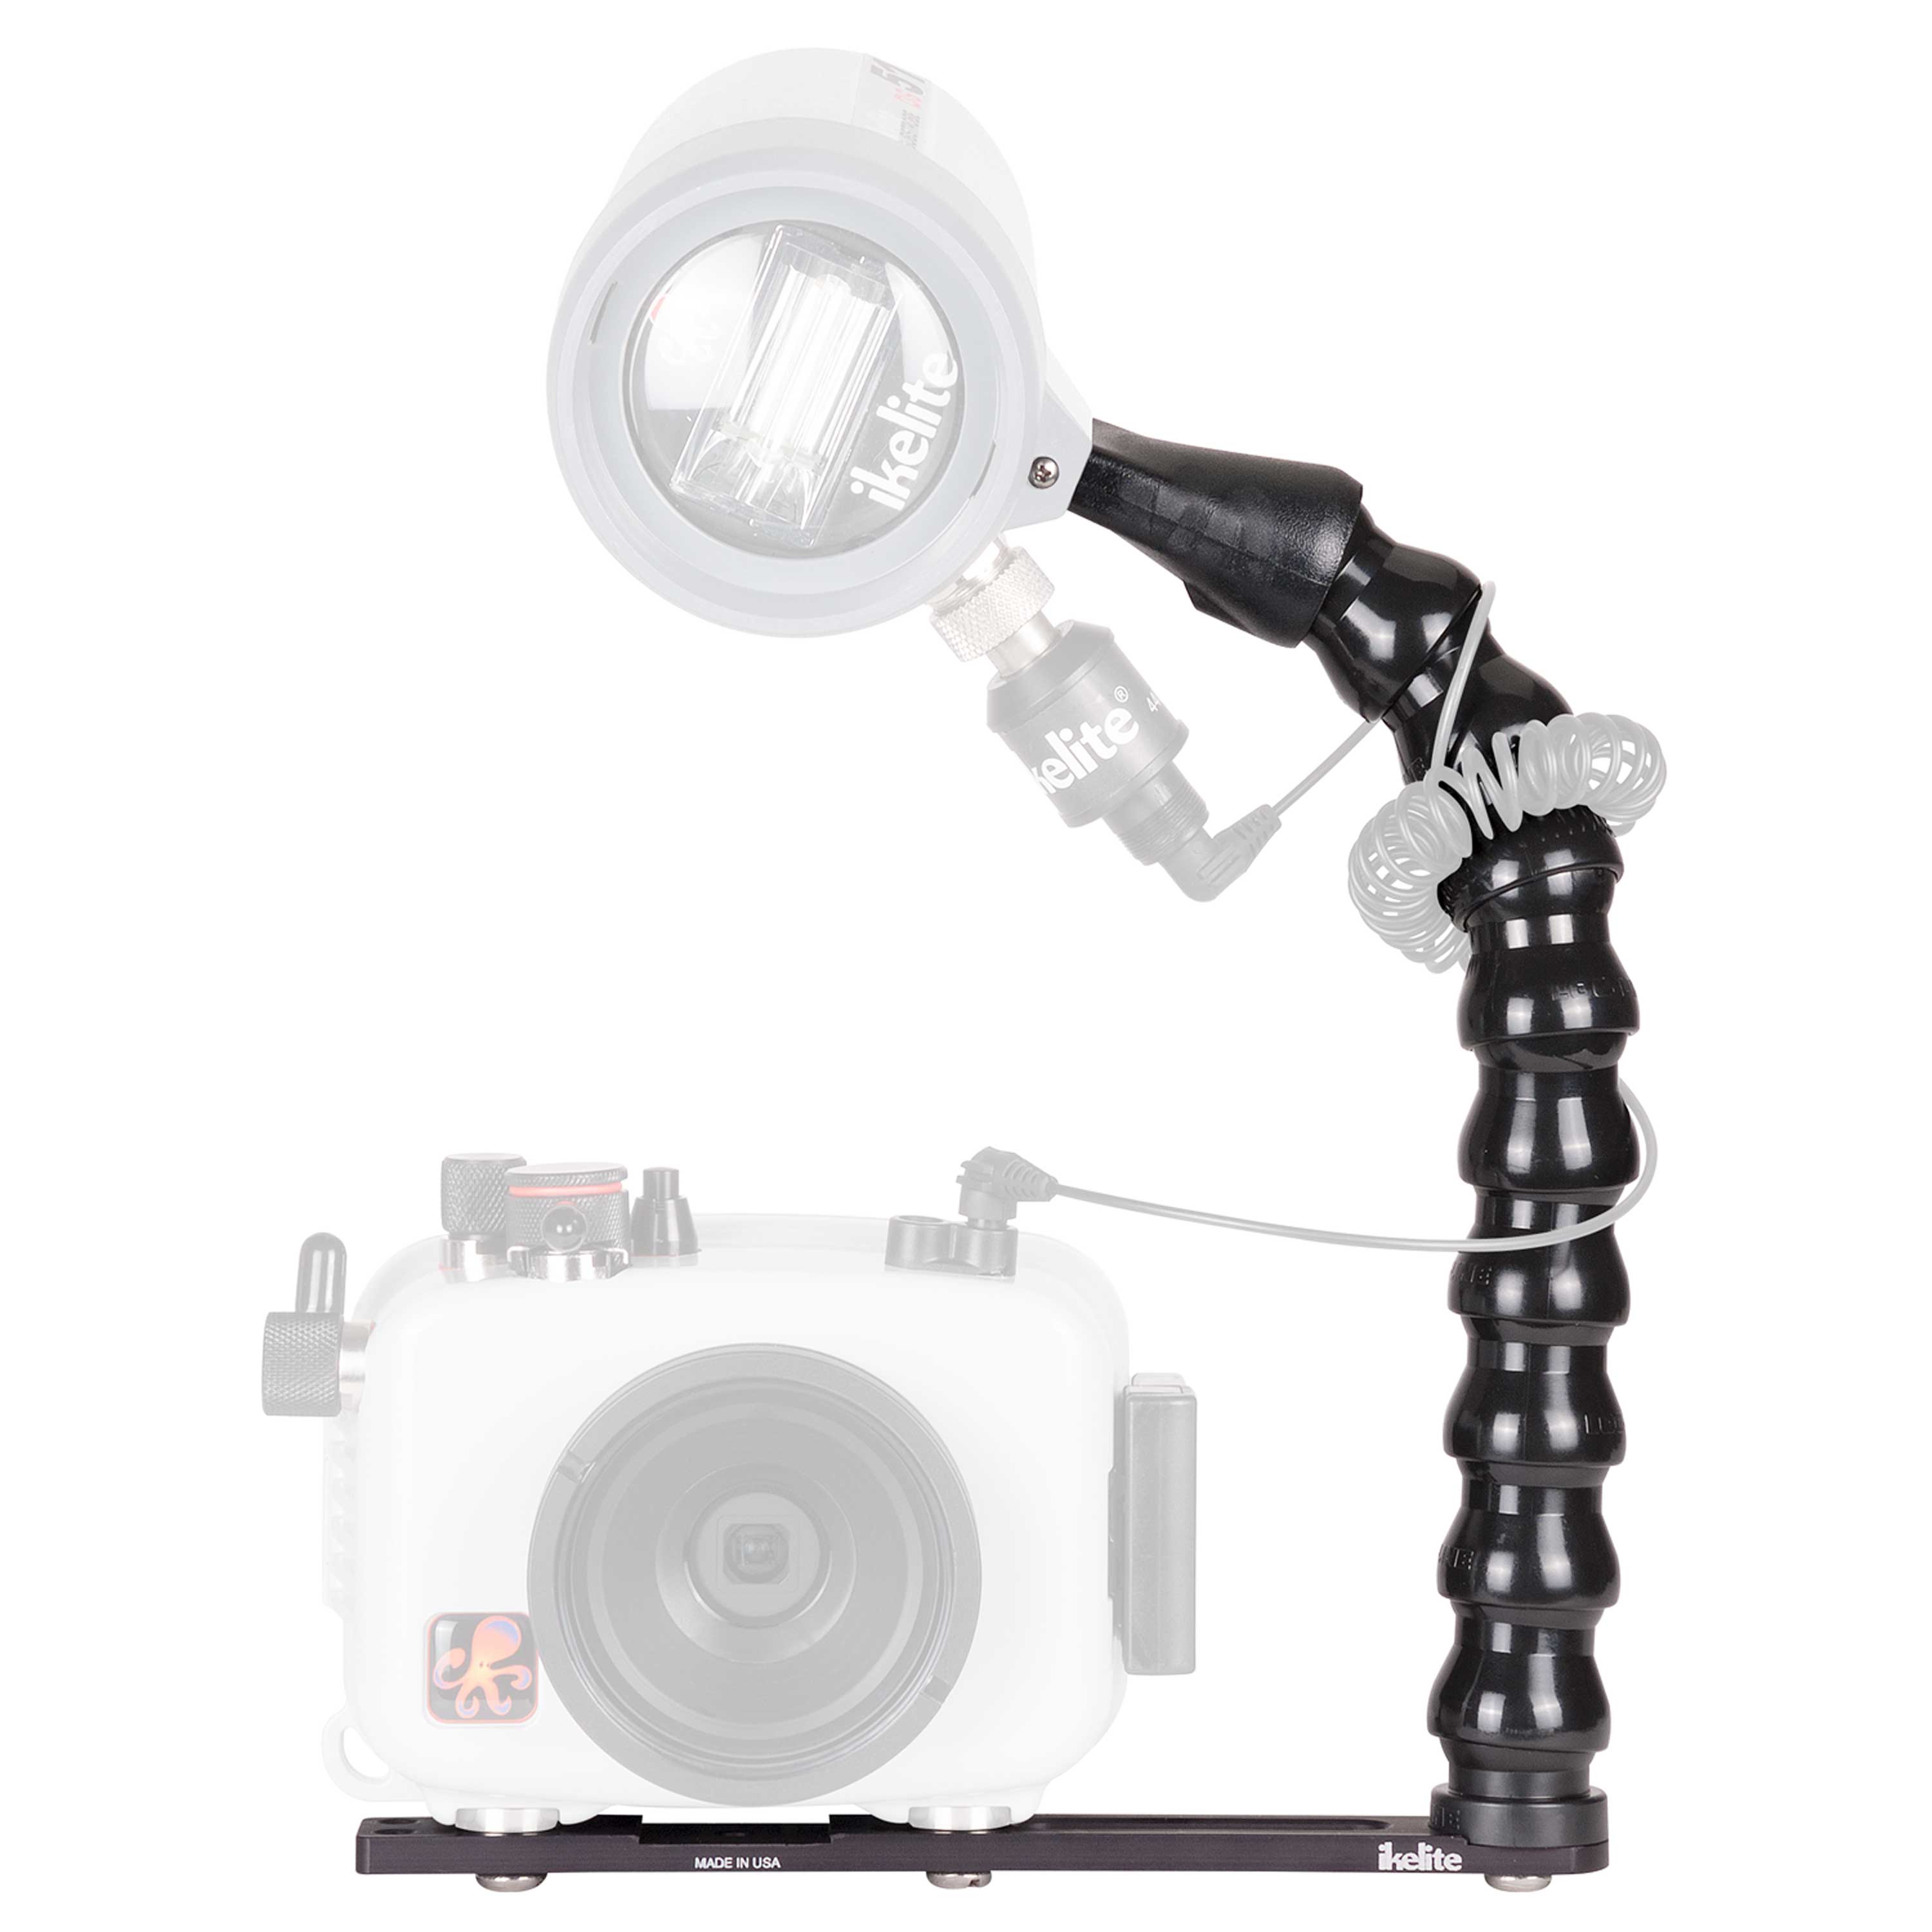 Action Tray II with DS51 Strobe Arm for ULTRAcompact Housings